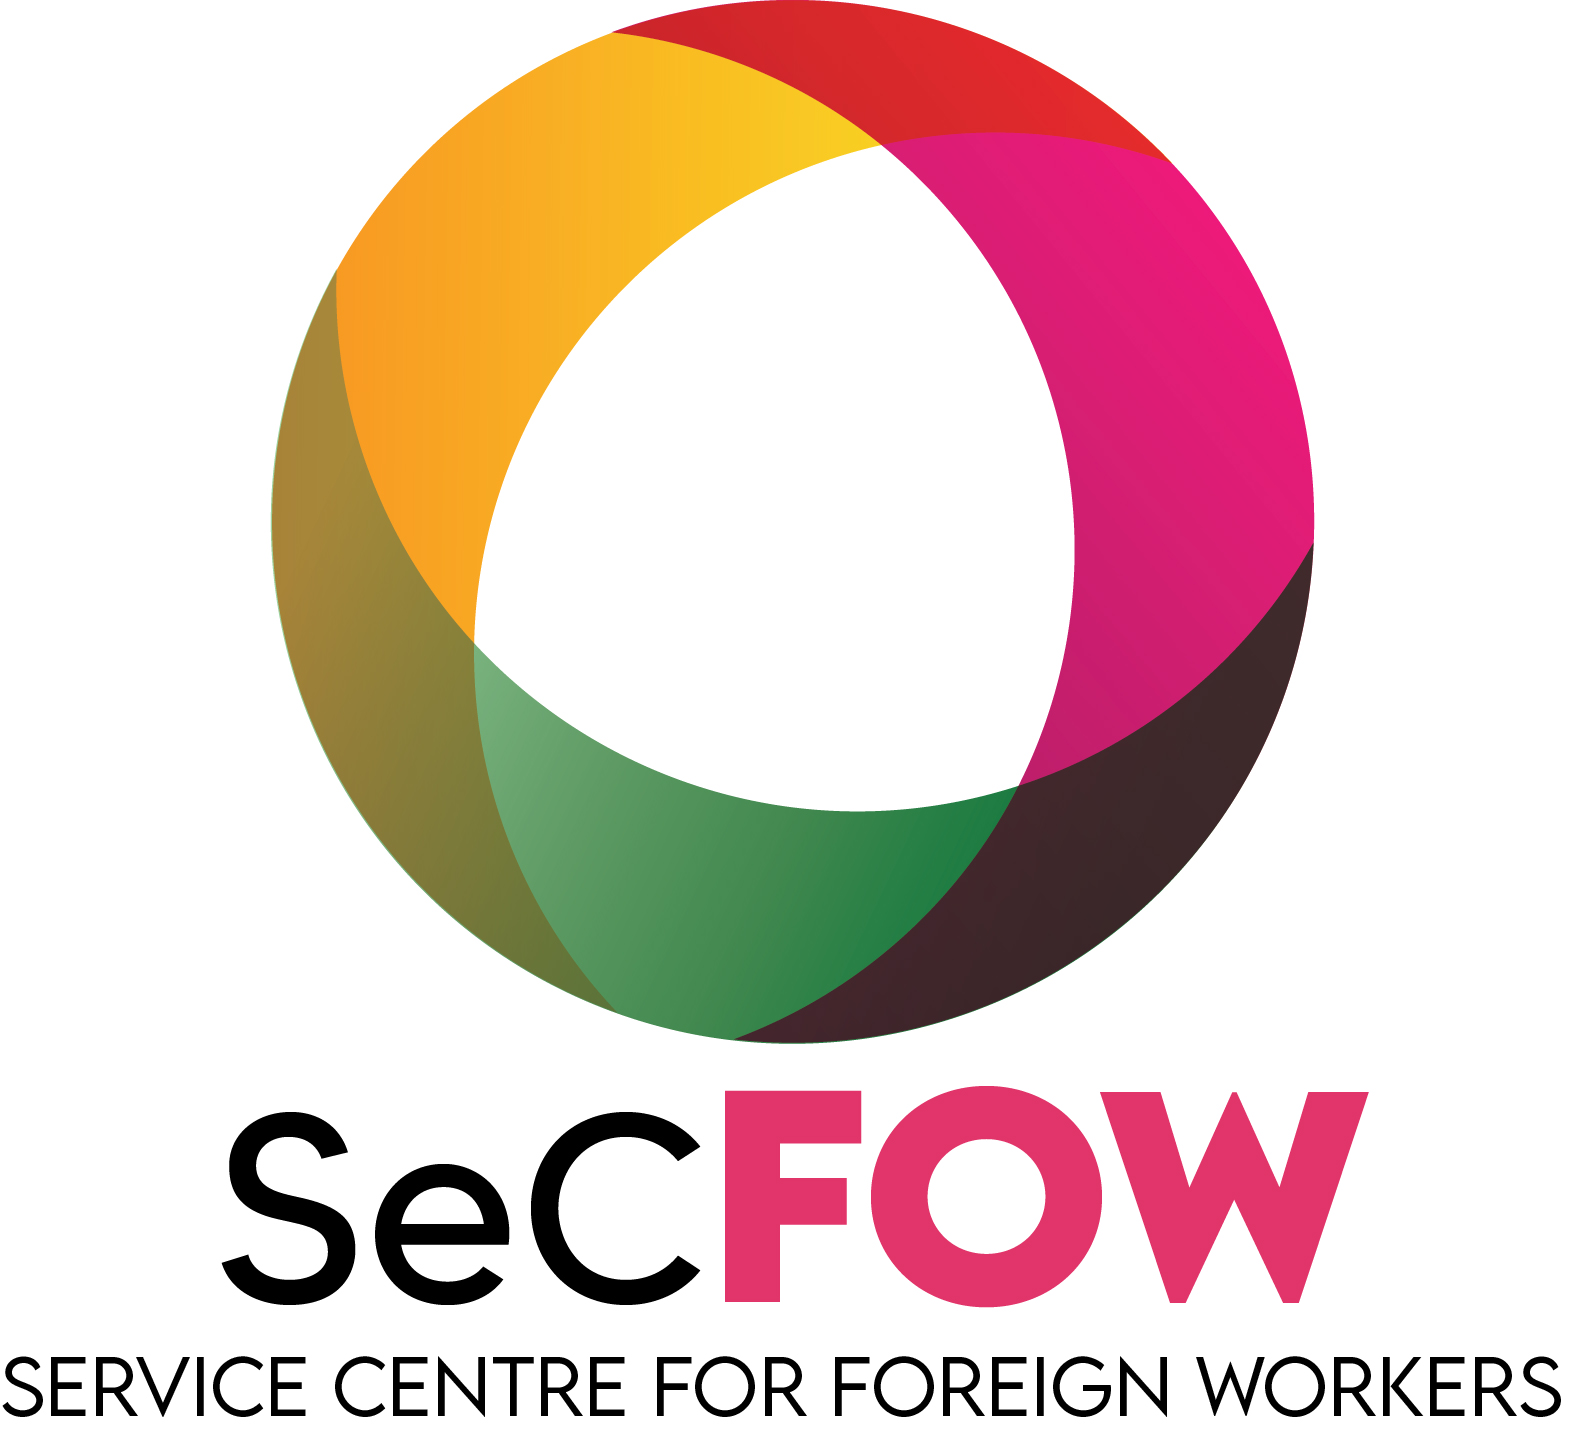 Service Centre for foreign workers – SeCFow